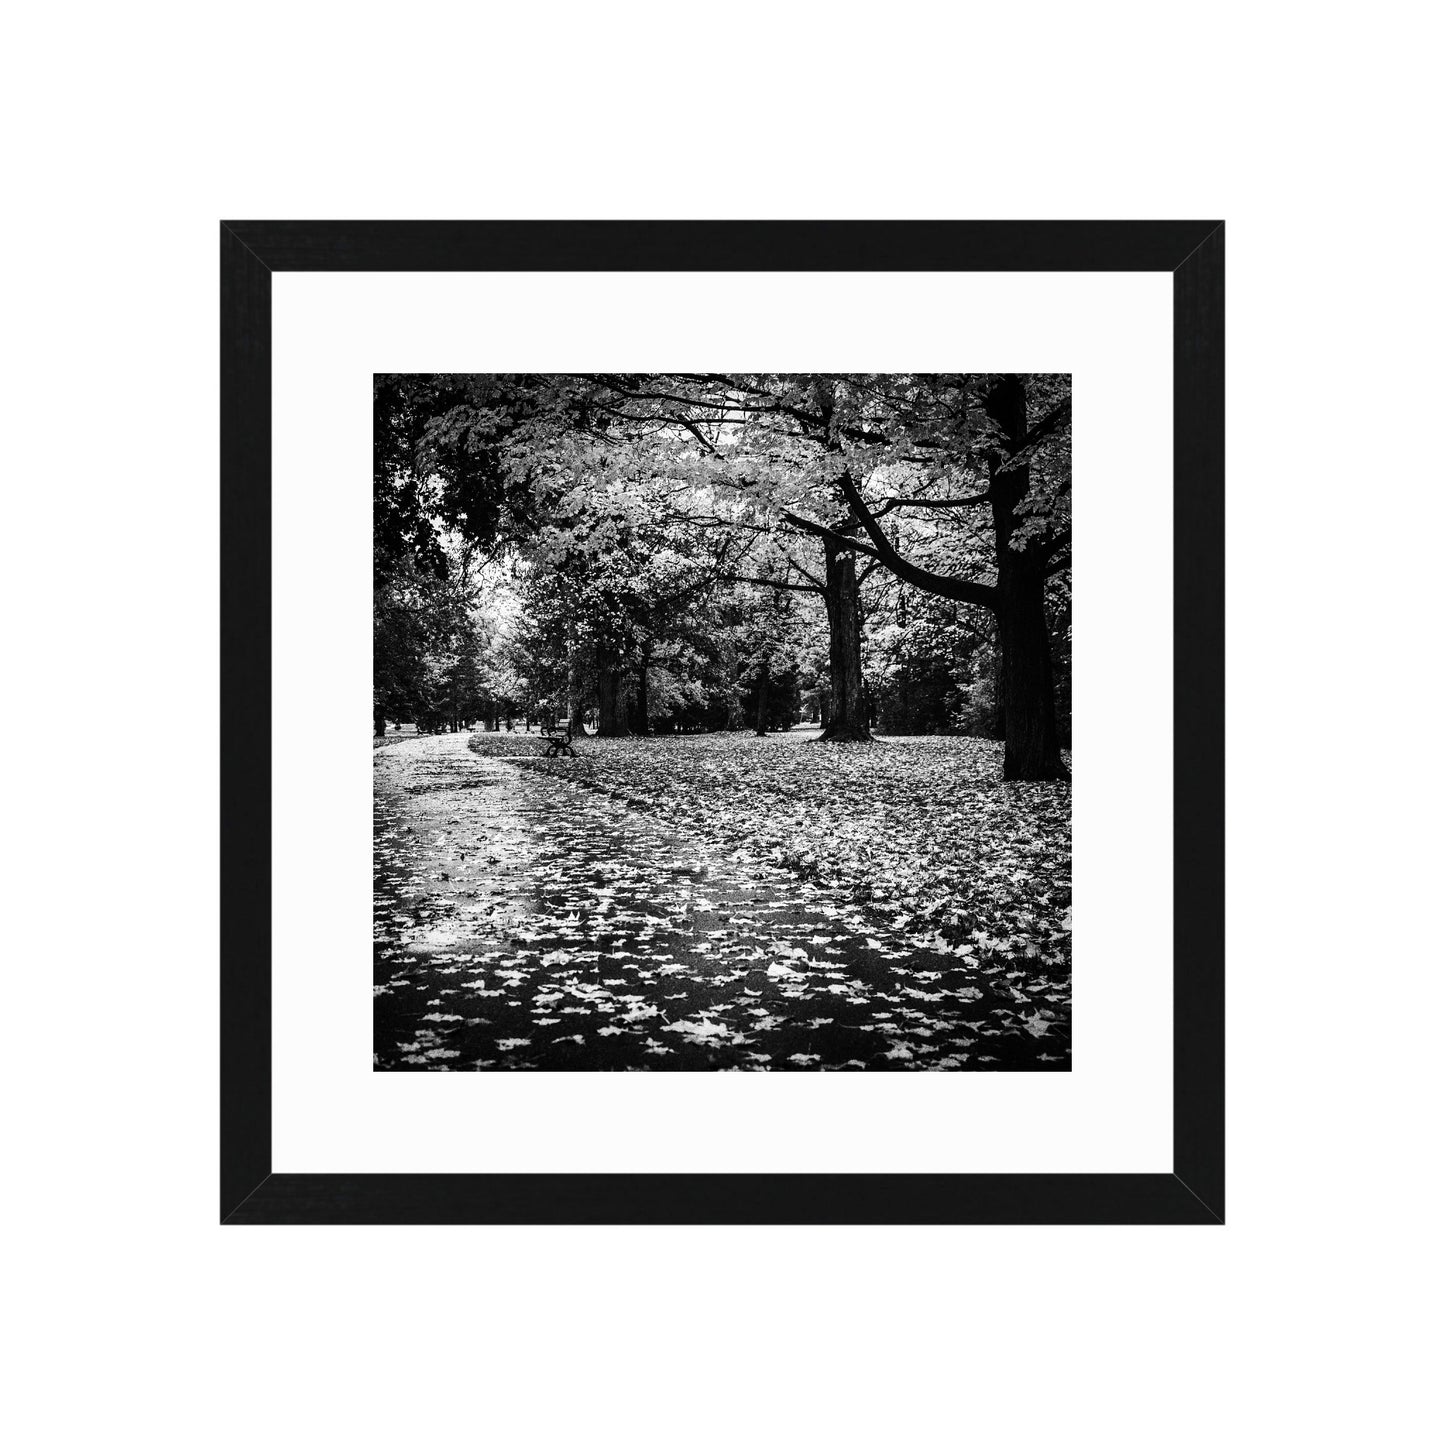 Autumn in Black and White by Paul Lambert